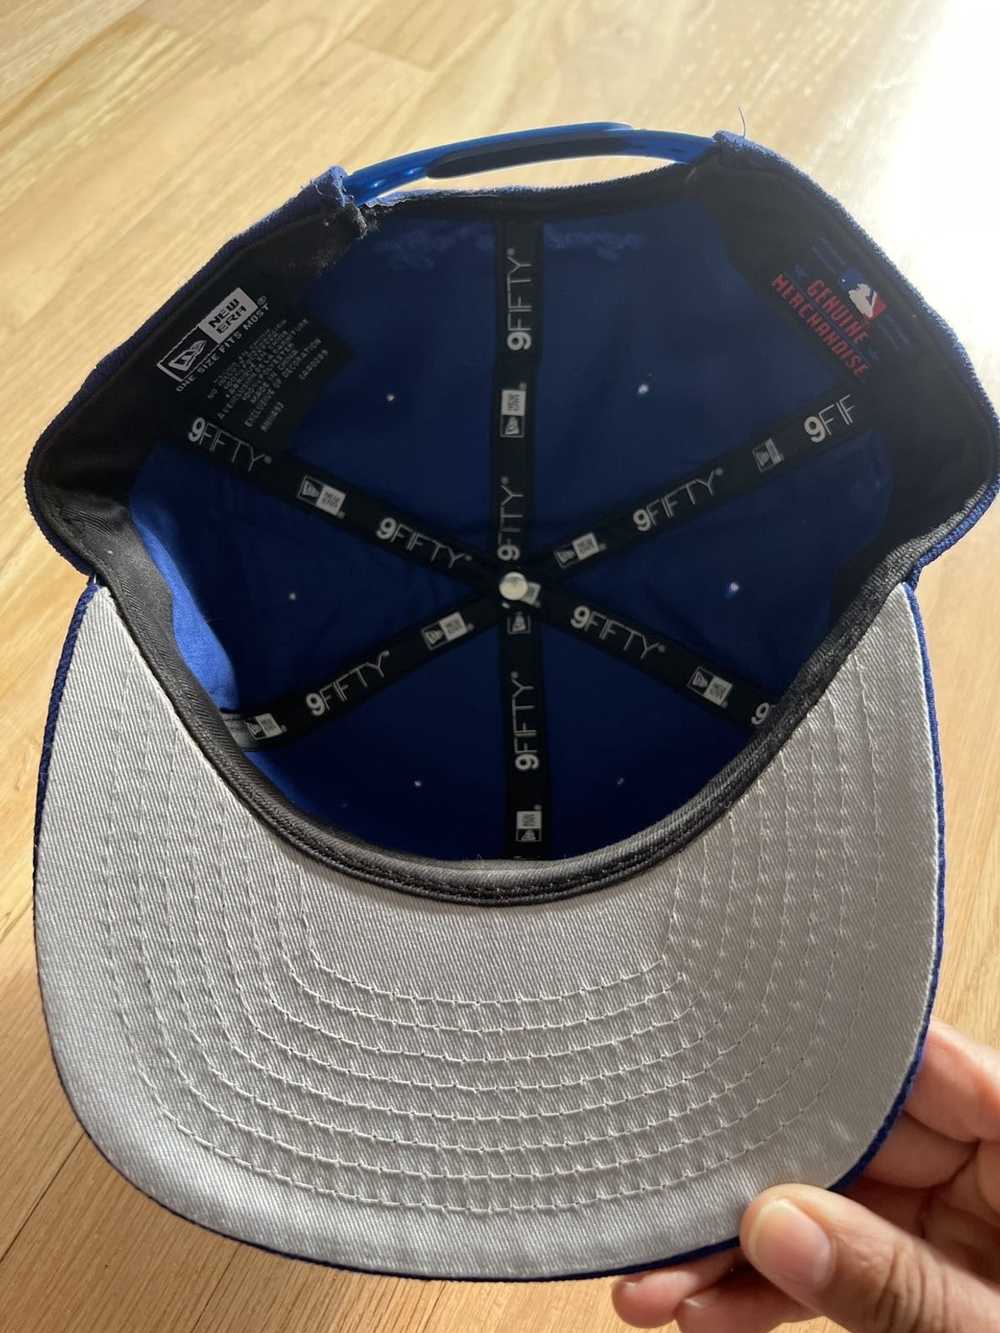 New Era Los Angeles Dodgers World Champions 59FIFTY Fitted in Royal — Major